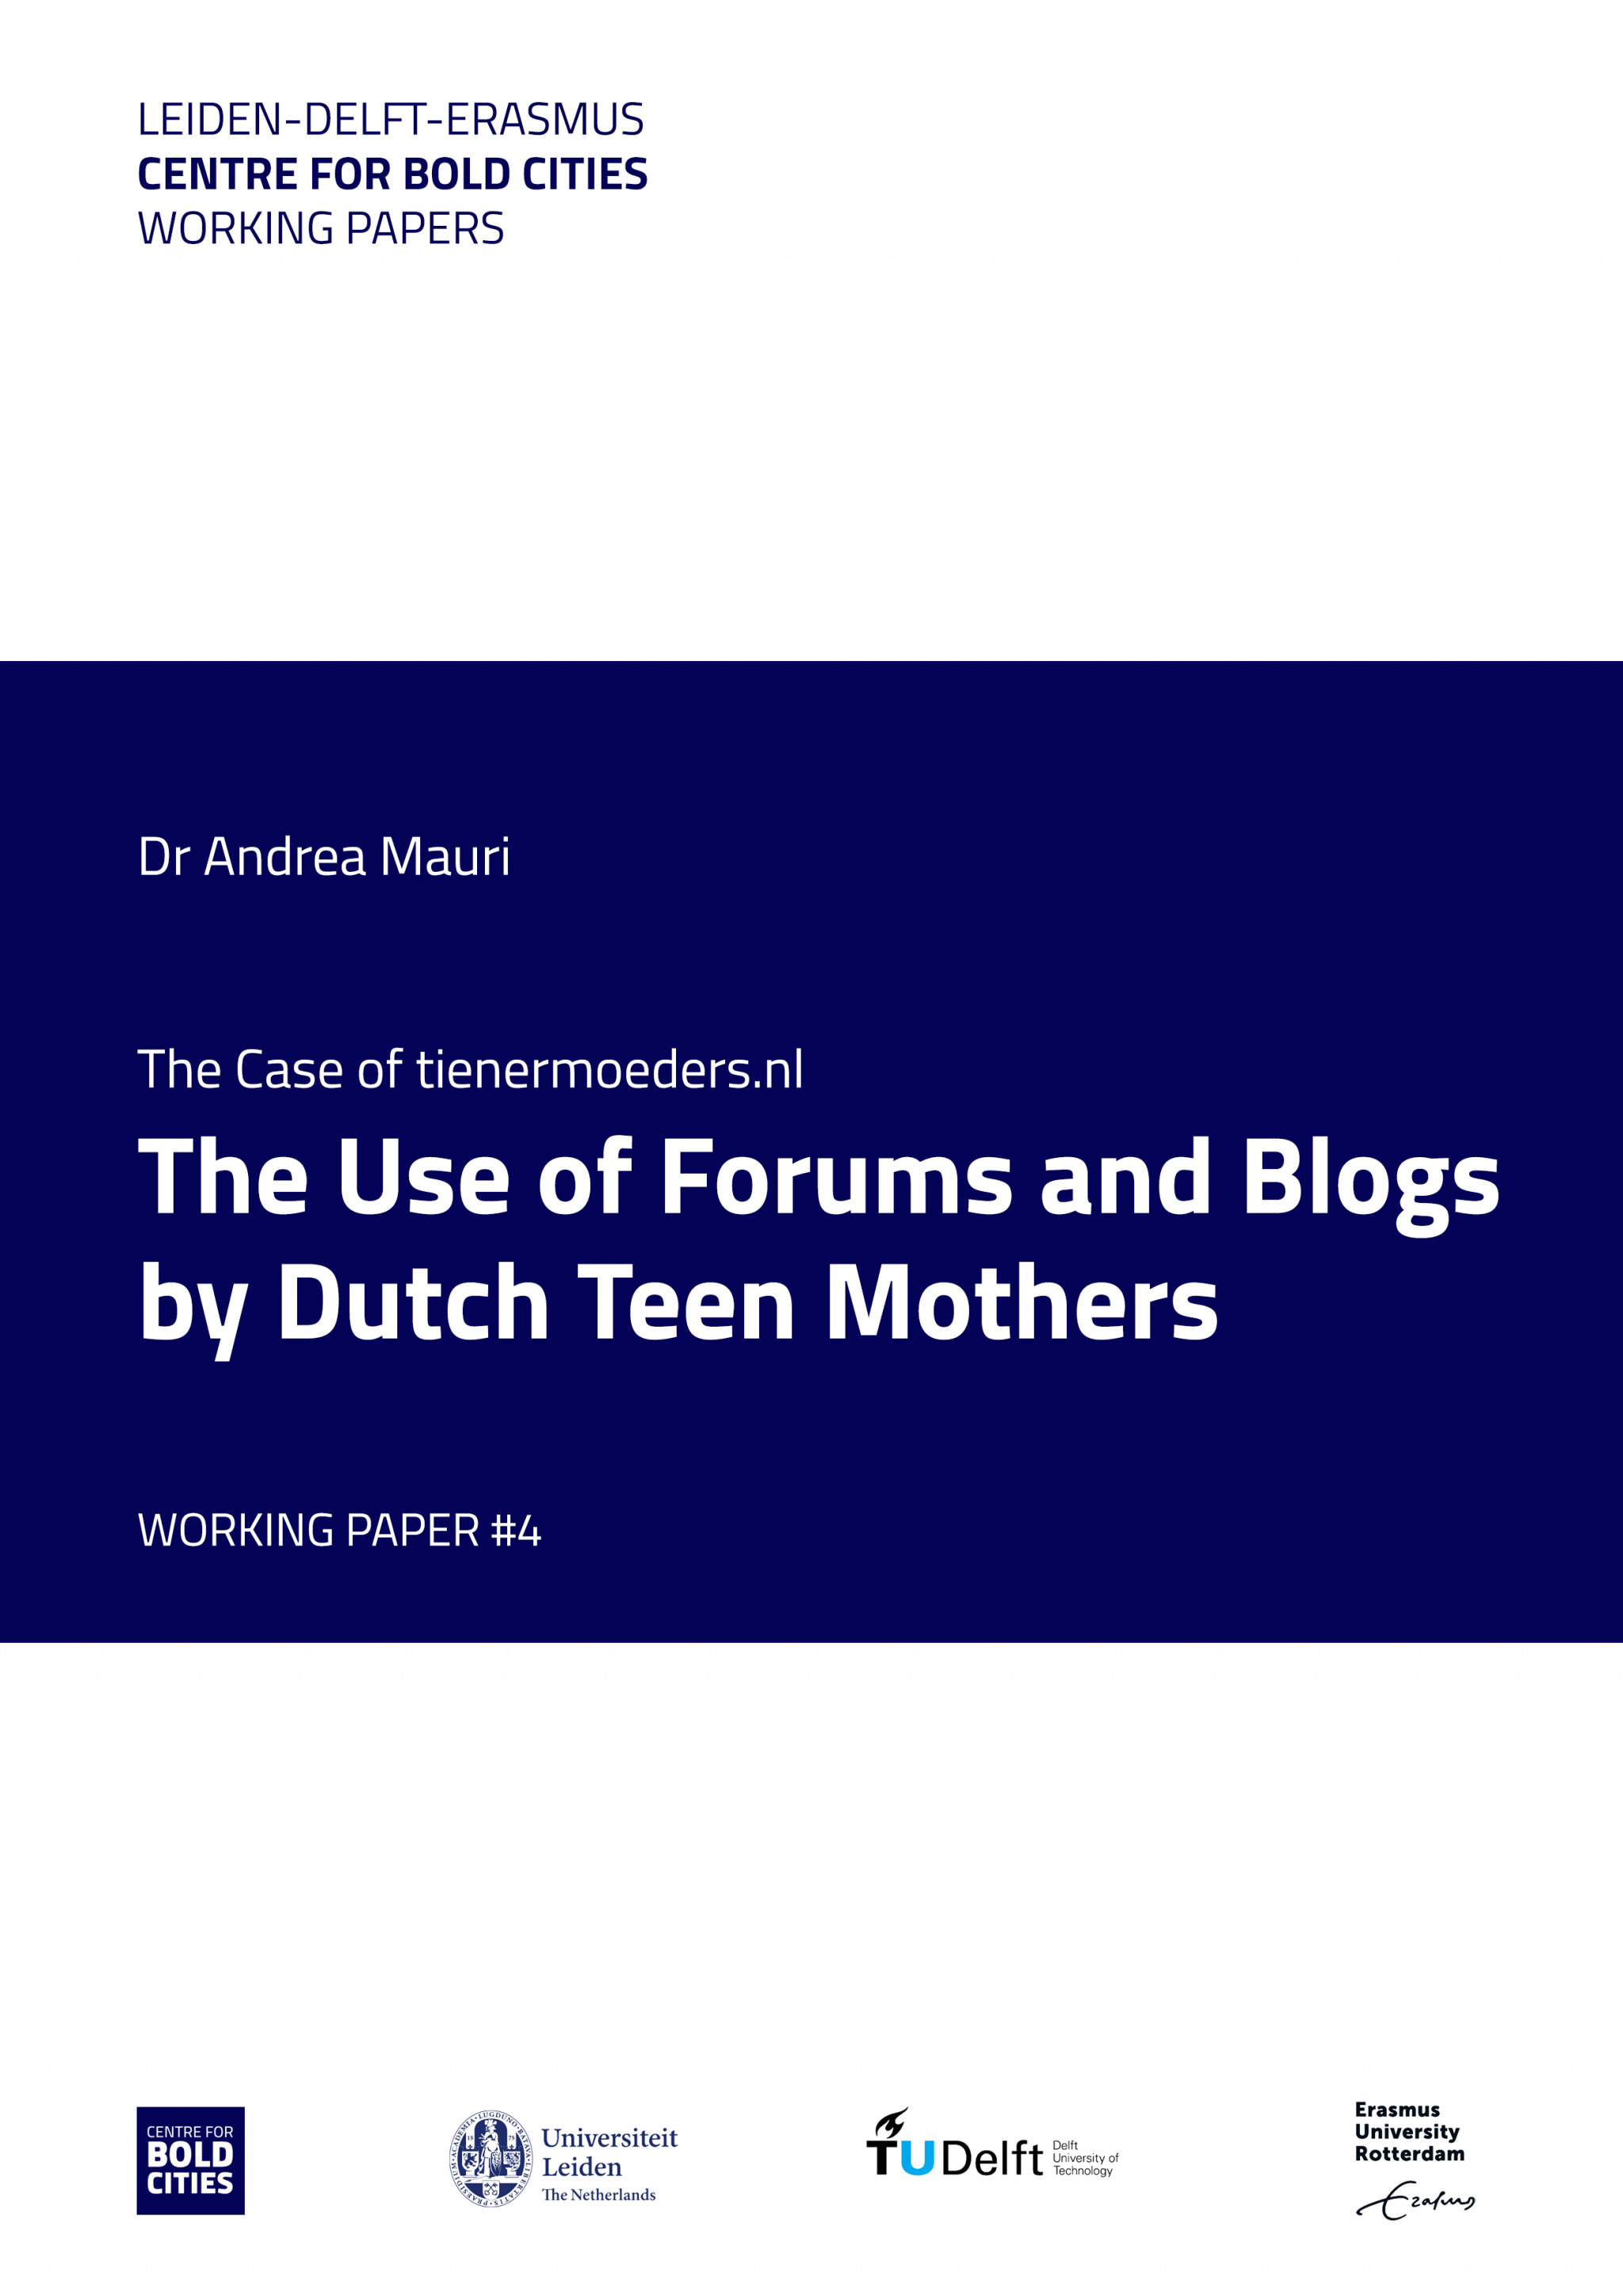 BOLD Cities working paper - Mauri - The Use of Forums and Blogs by Dutch Teen Mothers